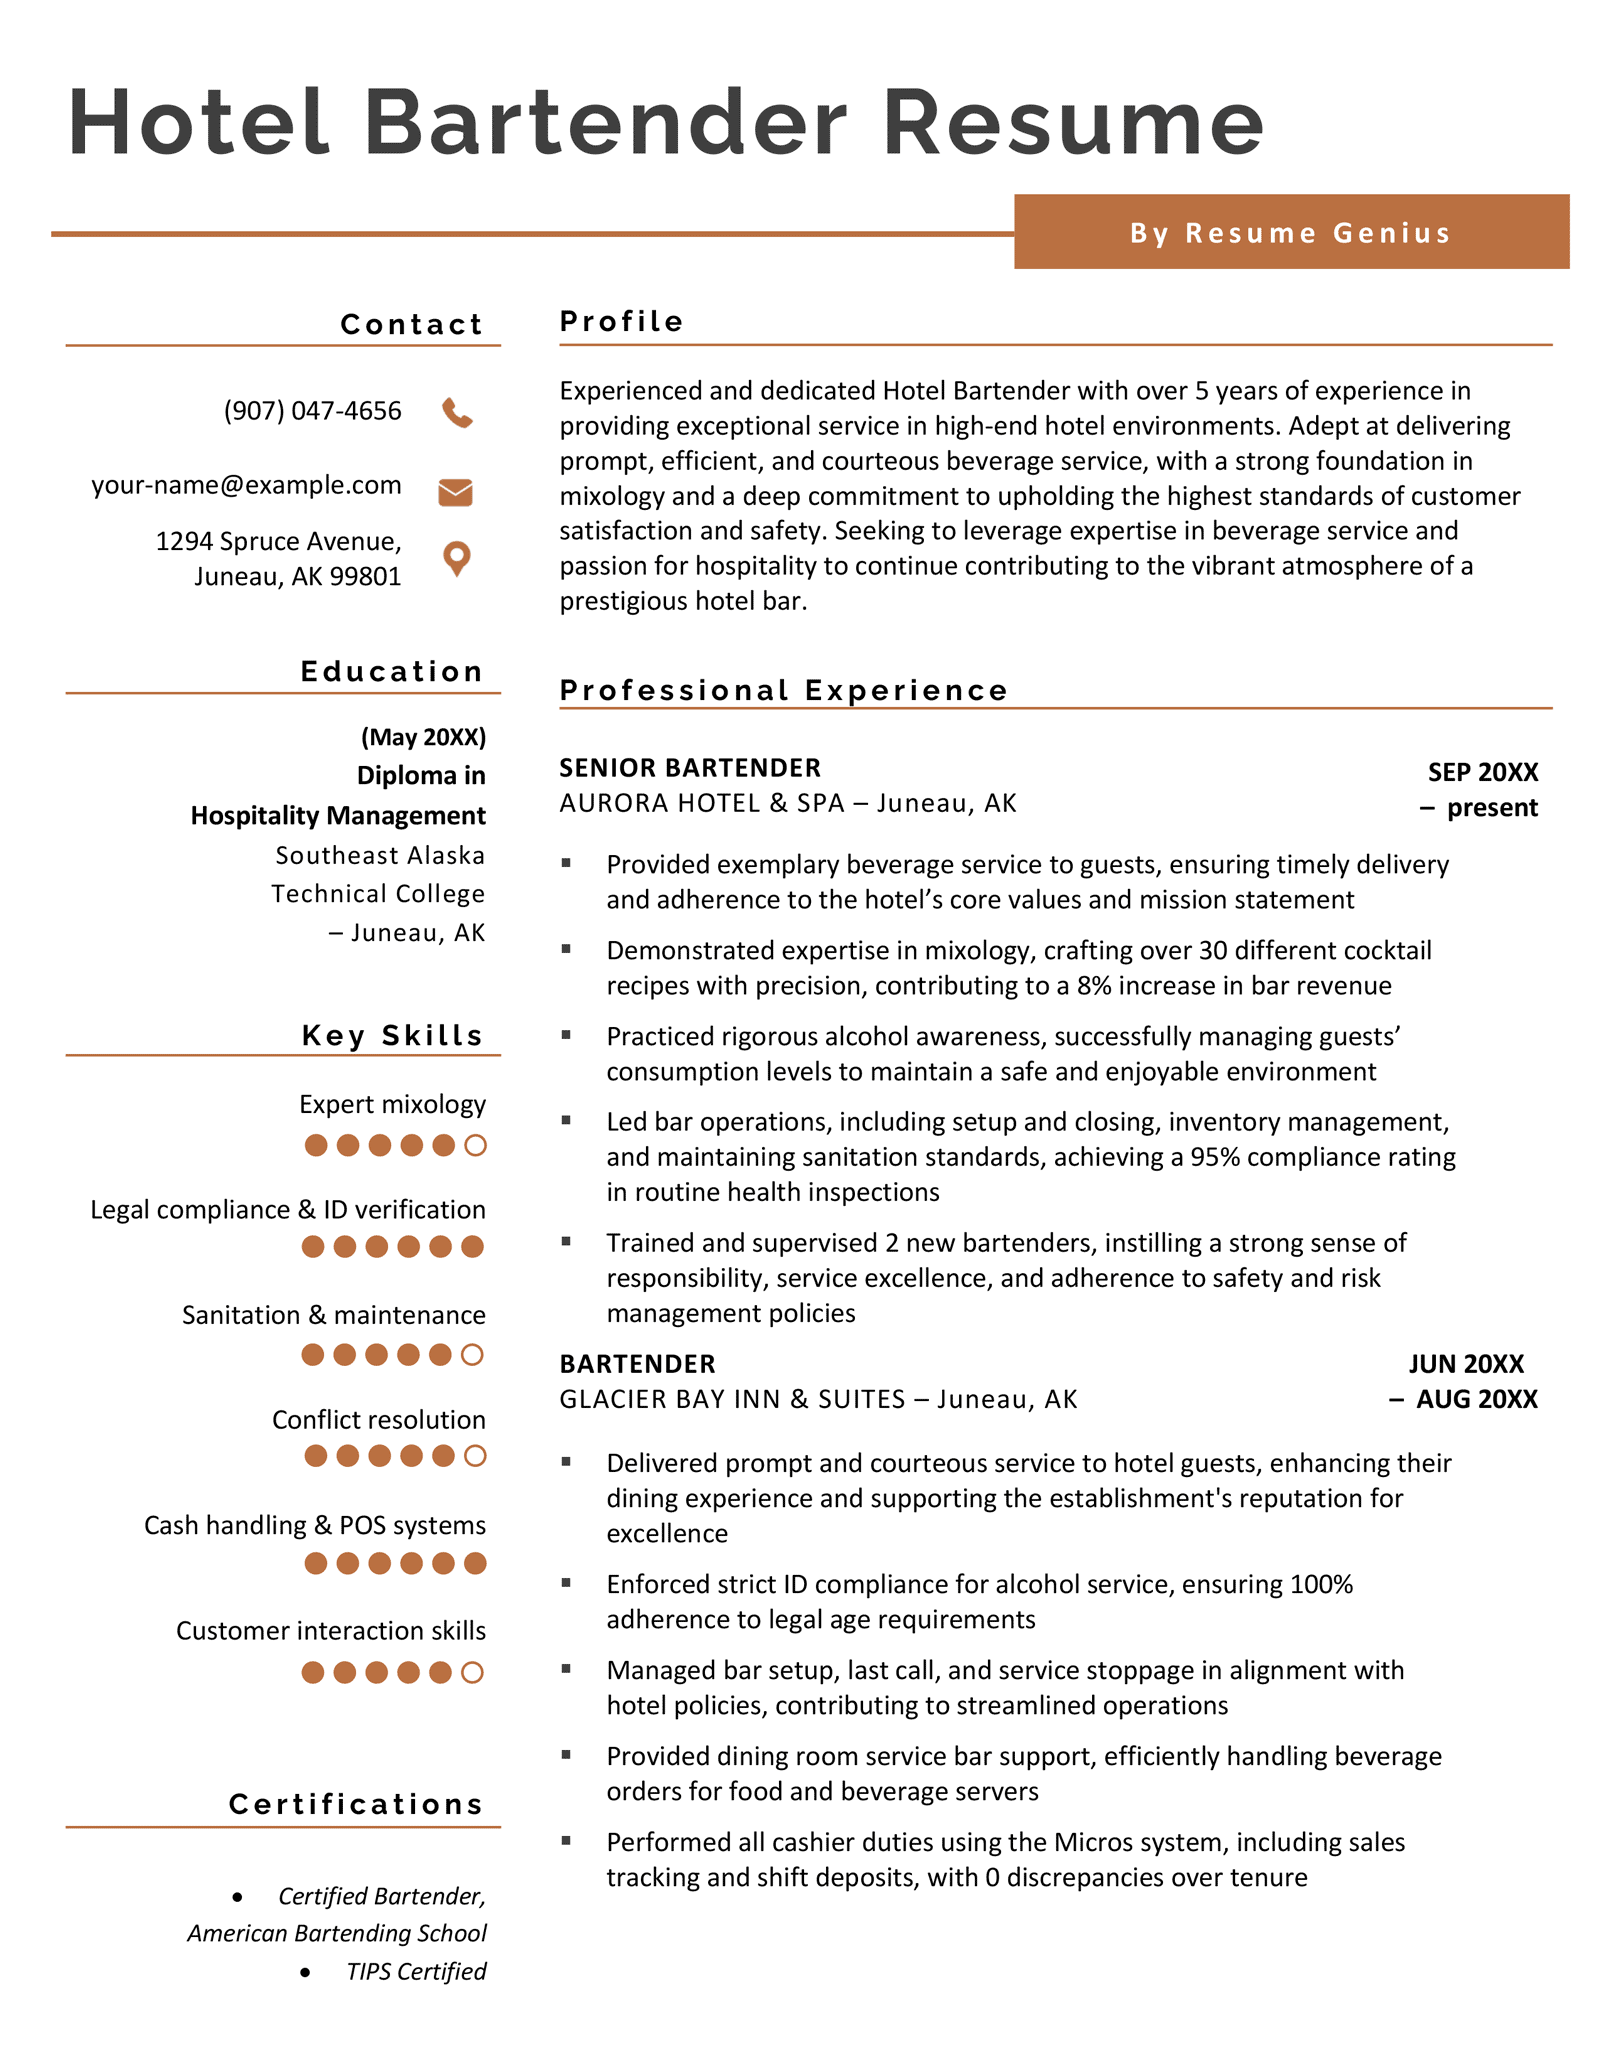 An orange, two-column resume example for a hotel bartender that uses skills bars to visualize this applicant's skills.